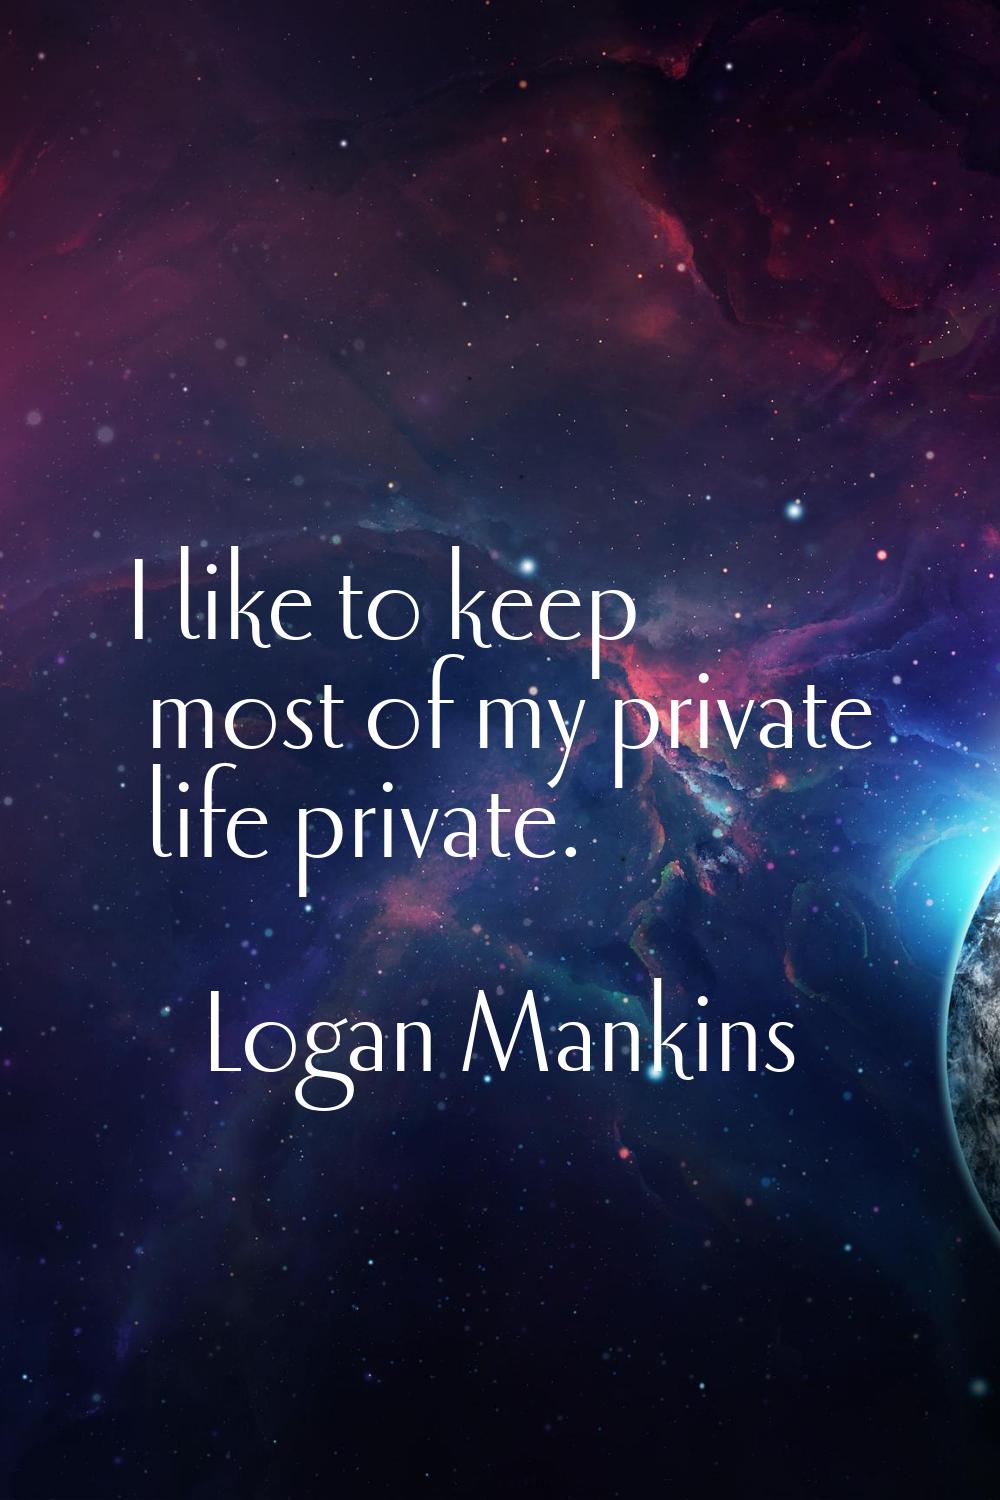 I like to keep most of my private life private.